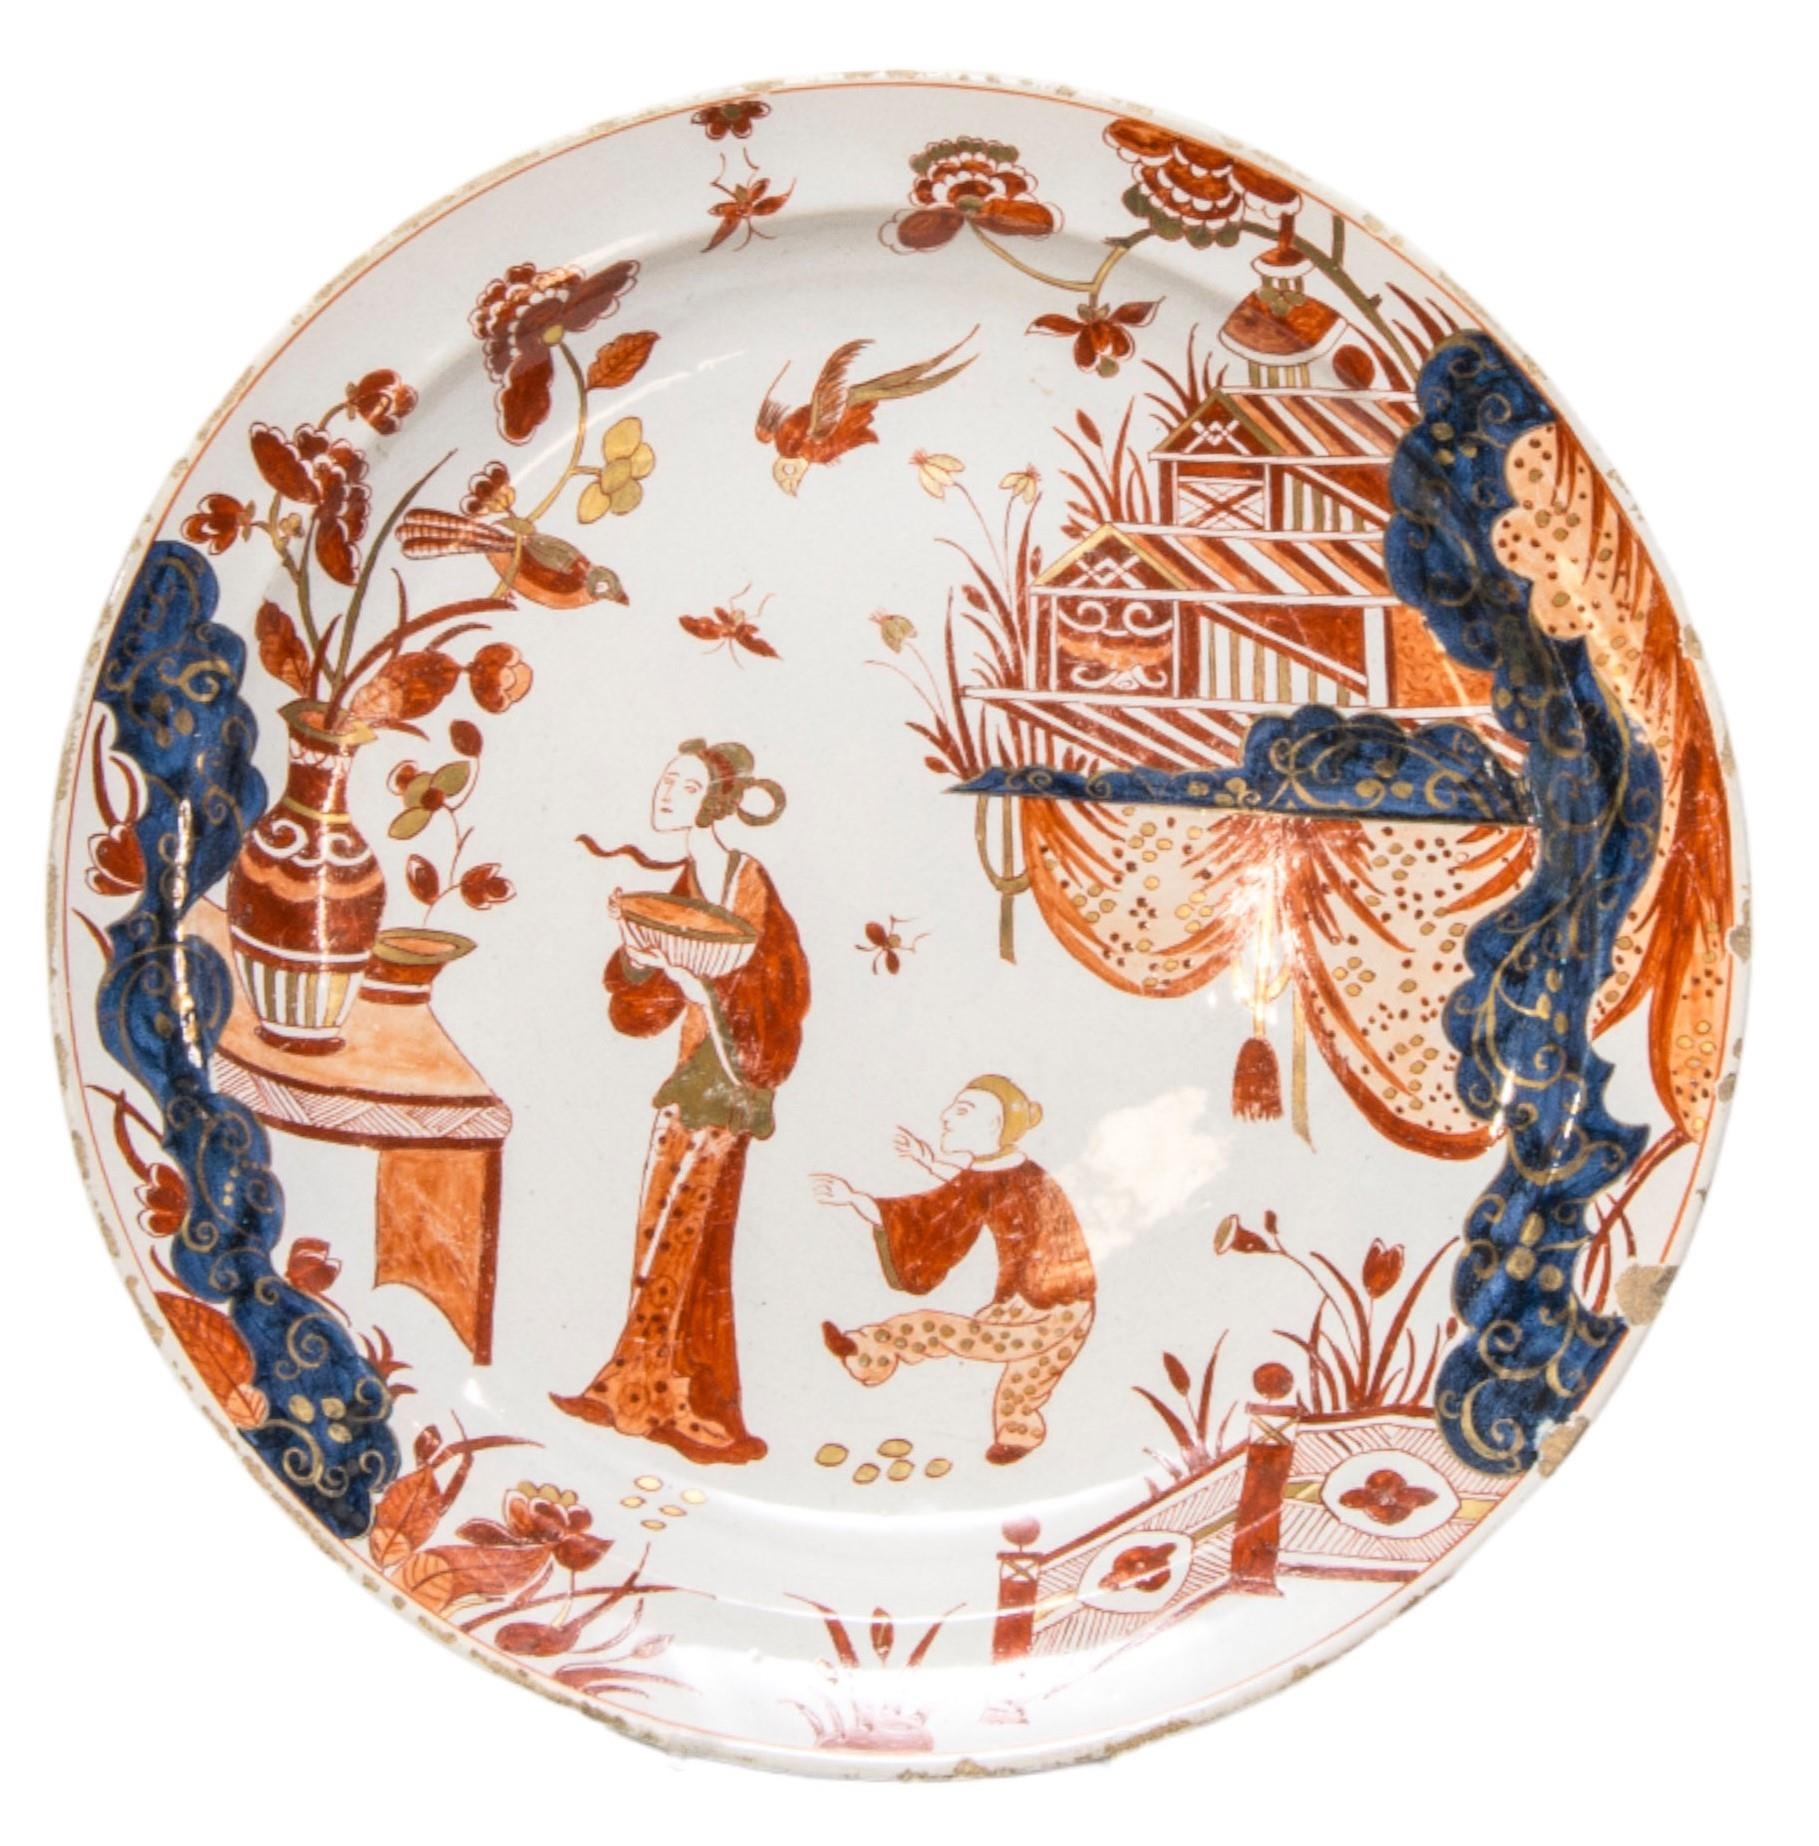 A DUTCH DELFT DISH, 18TH CENTURY, painted in the Imari palette with gilded detailing, depicting